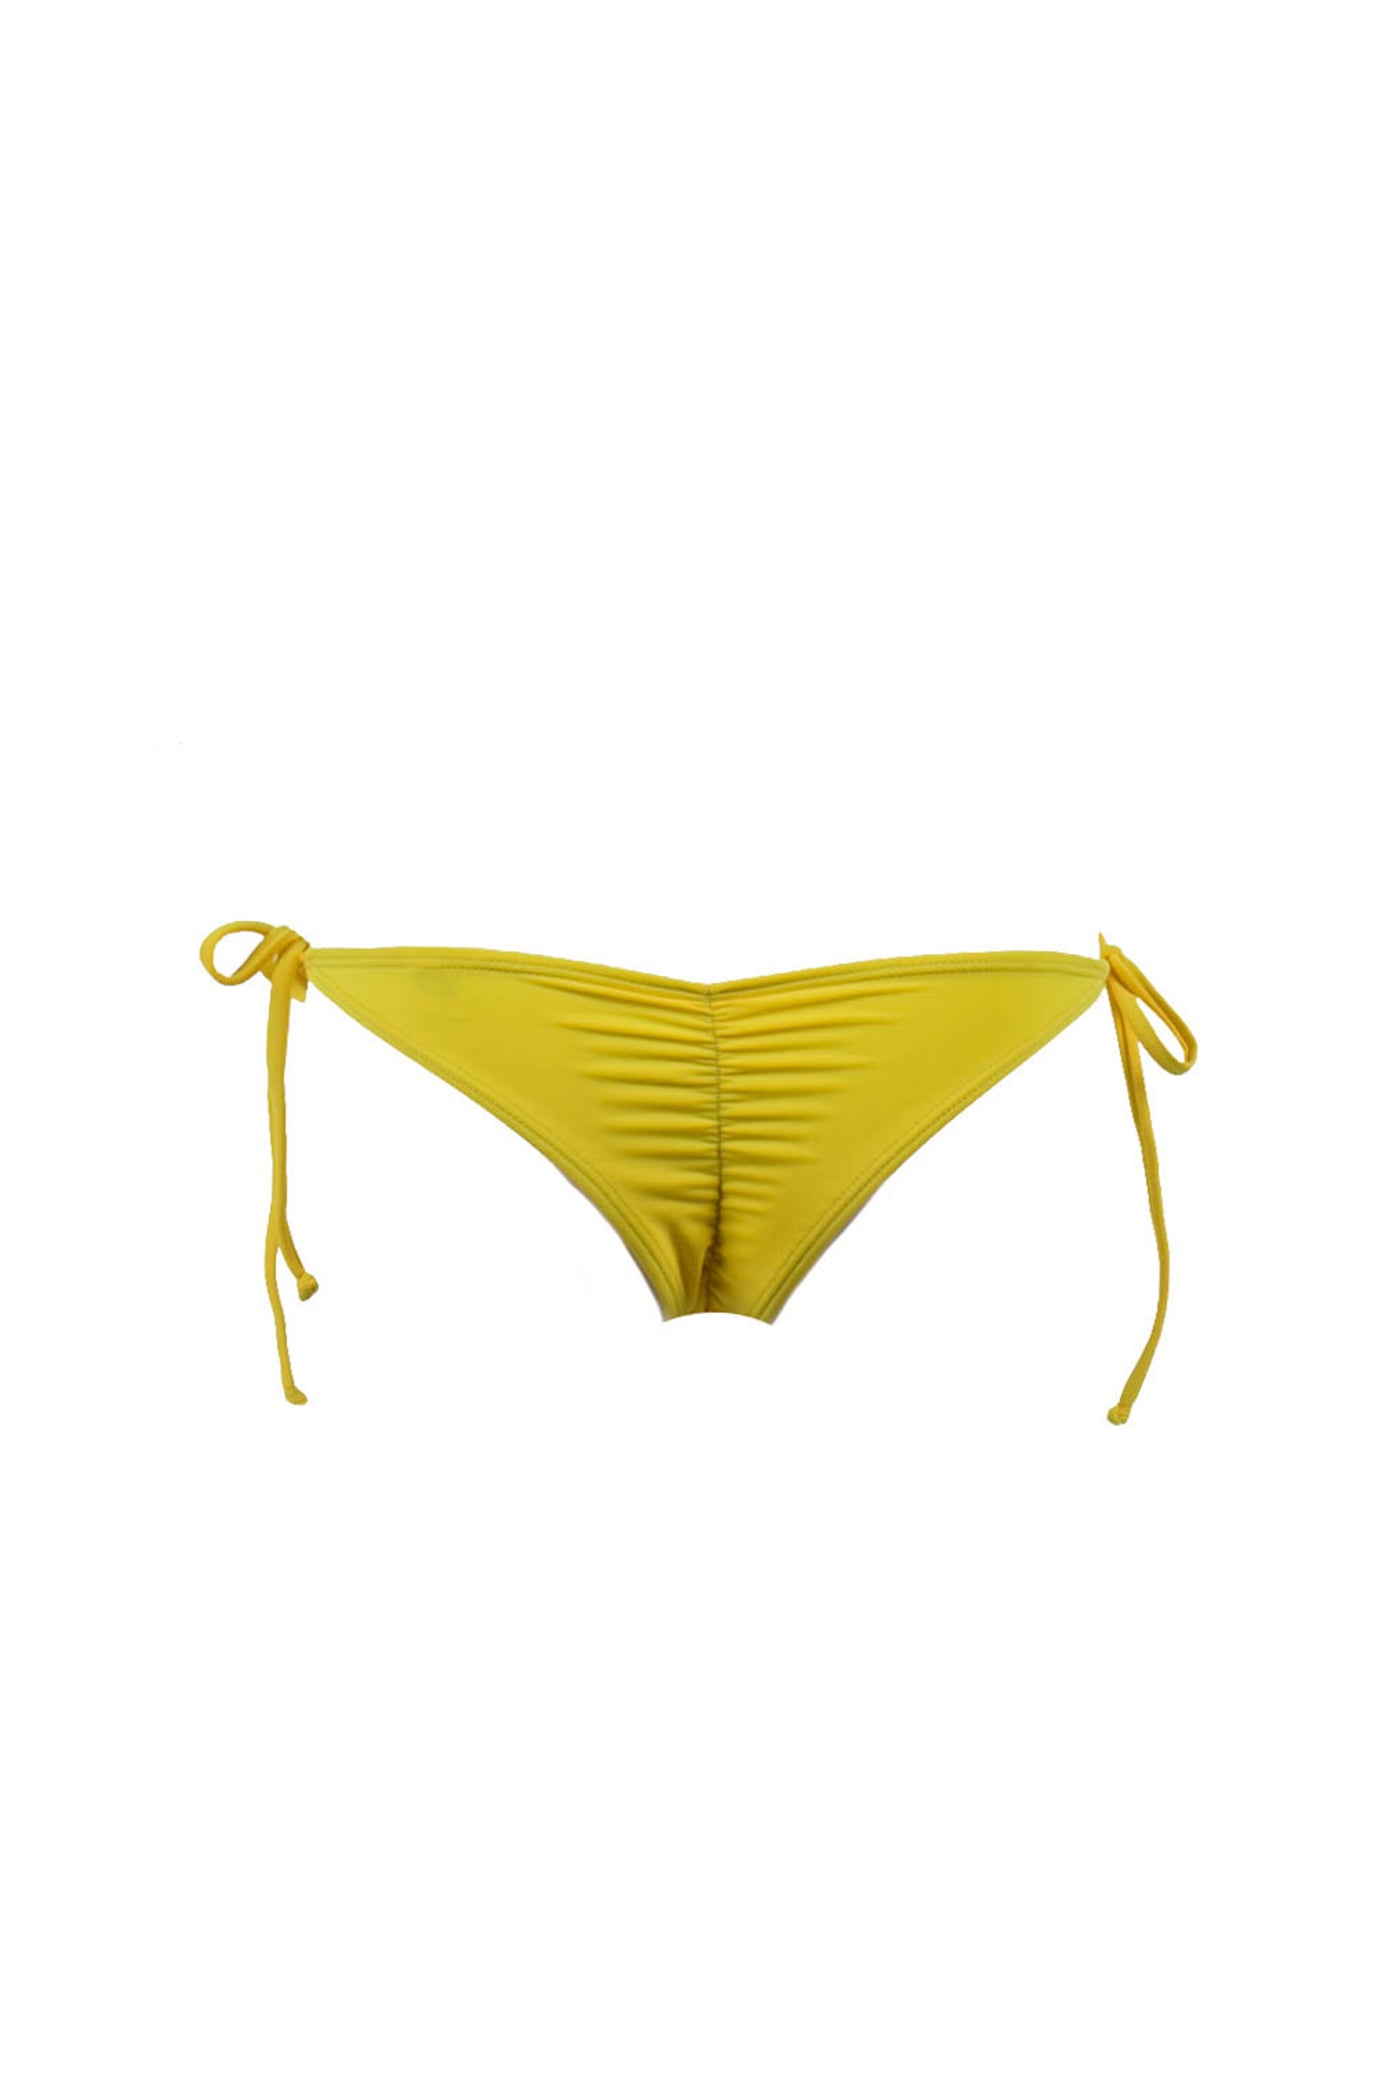 All The Time Sunshine // Brazilian Whale Tail Side Tie Scrunch Bottom